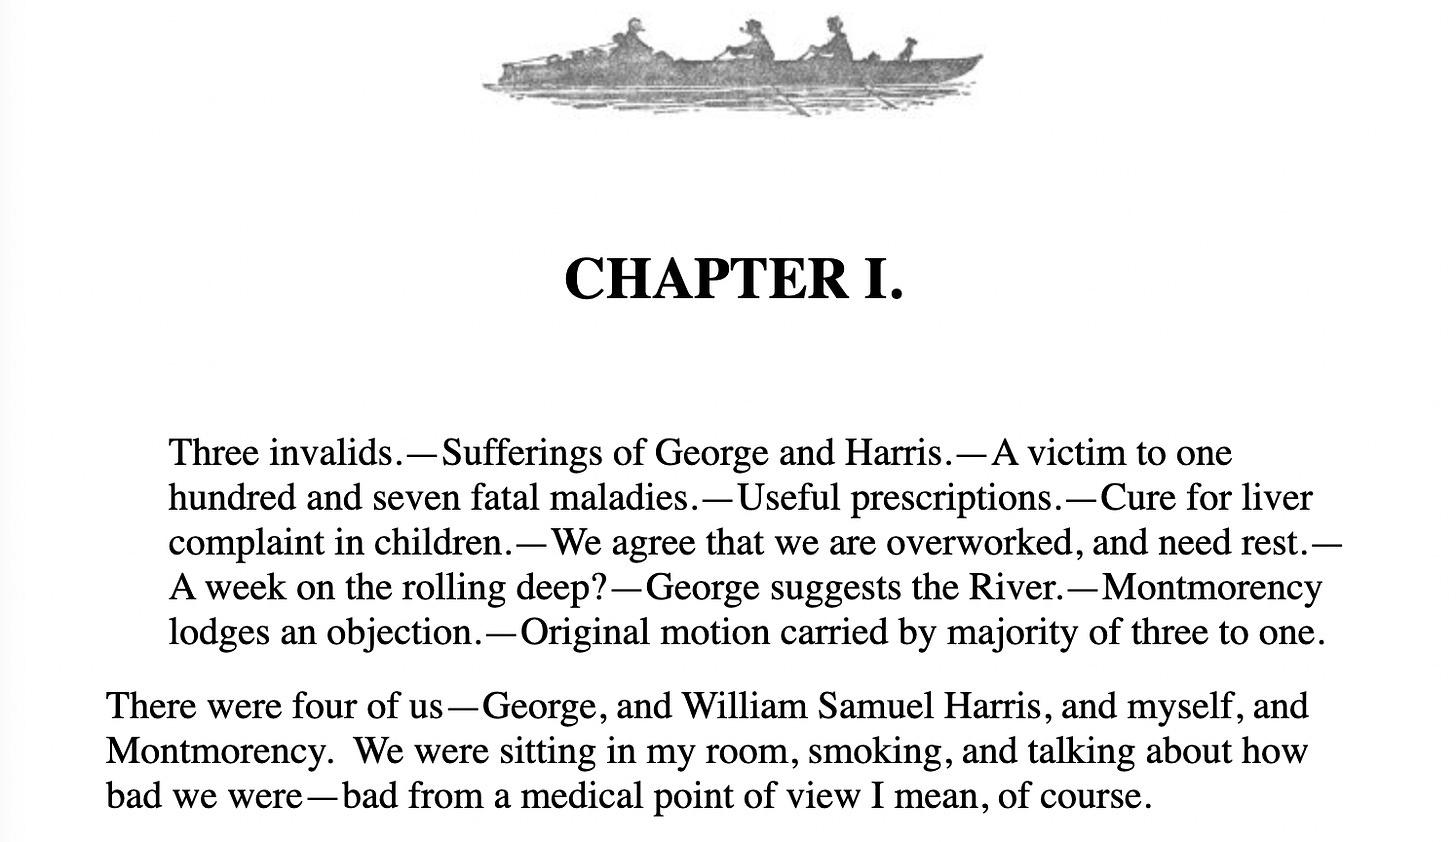 CHAPTER I. Three invalids.—Sufferings of George and Harris.—A victim to one hundred and seven fatal maladies.—Useful prescriptions.—Cure for liver complaint in children.—We agree that we are overworked, and need rest.—A week on the rolling deep?—George suggests the River.—Montmorency lodges an objection.—Original motion carried by majority of three to one.  There were four of us—George, and William Samuel Harris, and myself, and Montmorency.  We were sitting in my room, smoking, and talking about how bad we were—bad from a medical point of view I mean, of course.